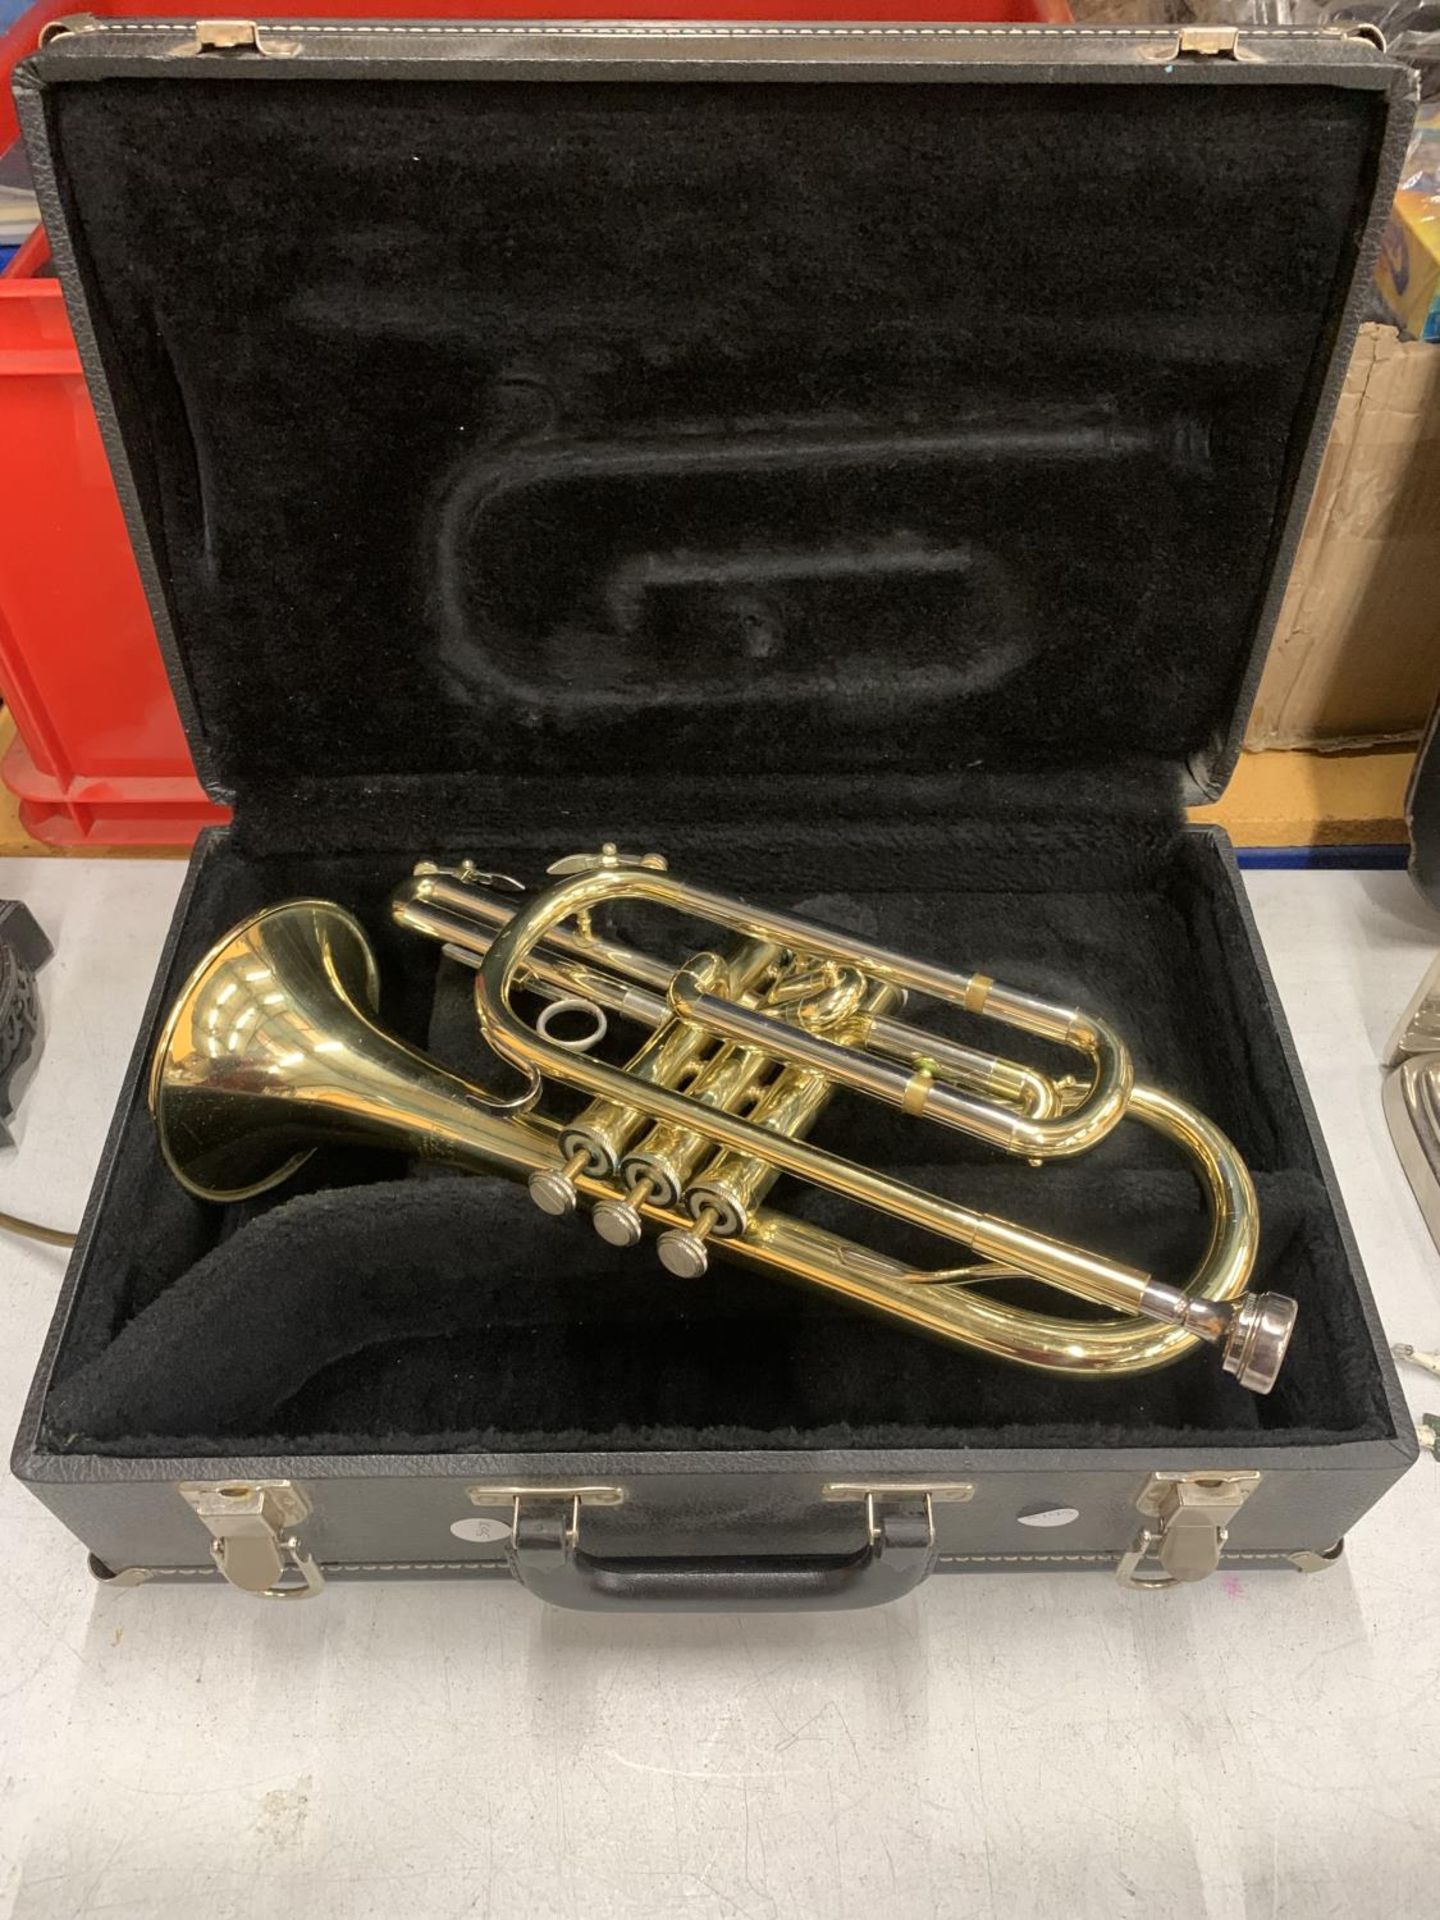 A CASED BLESSING, U.S.A SCHOLASTIC TRUMPET - Image 2 of 8